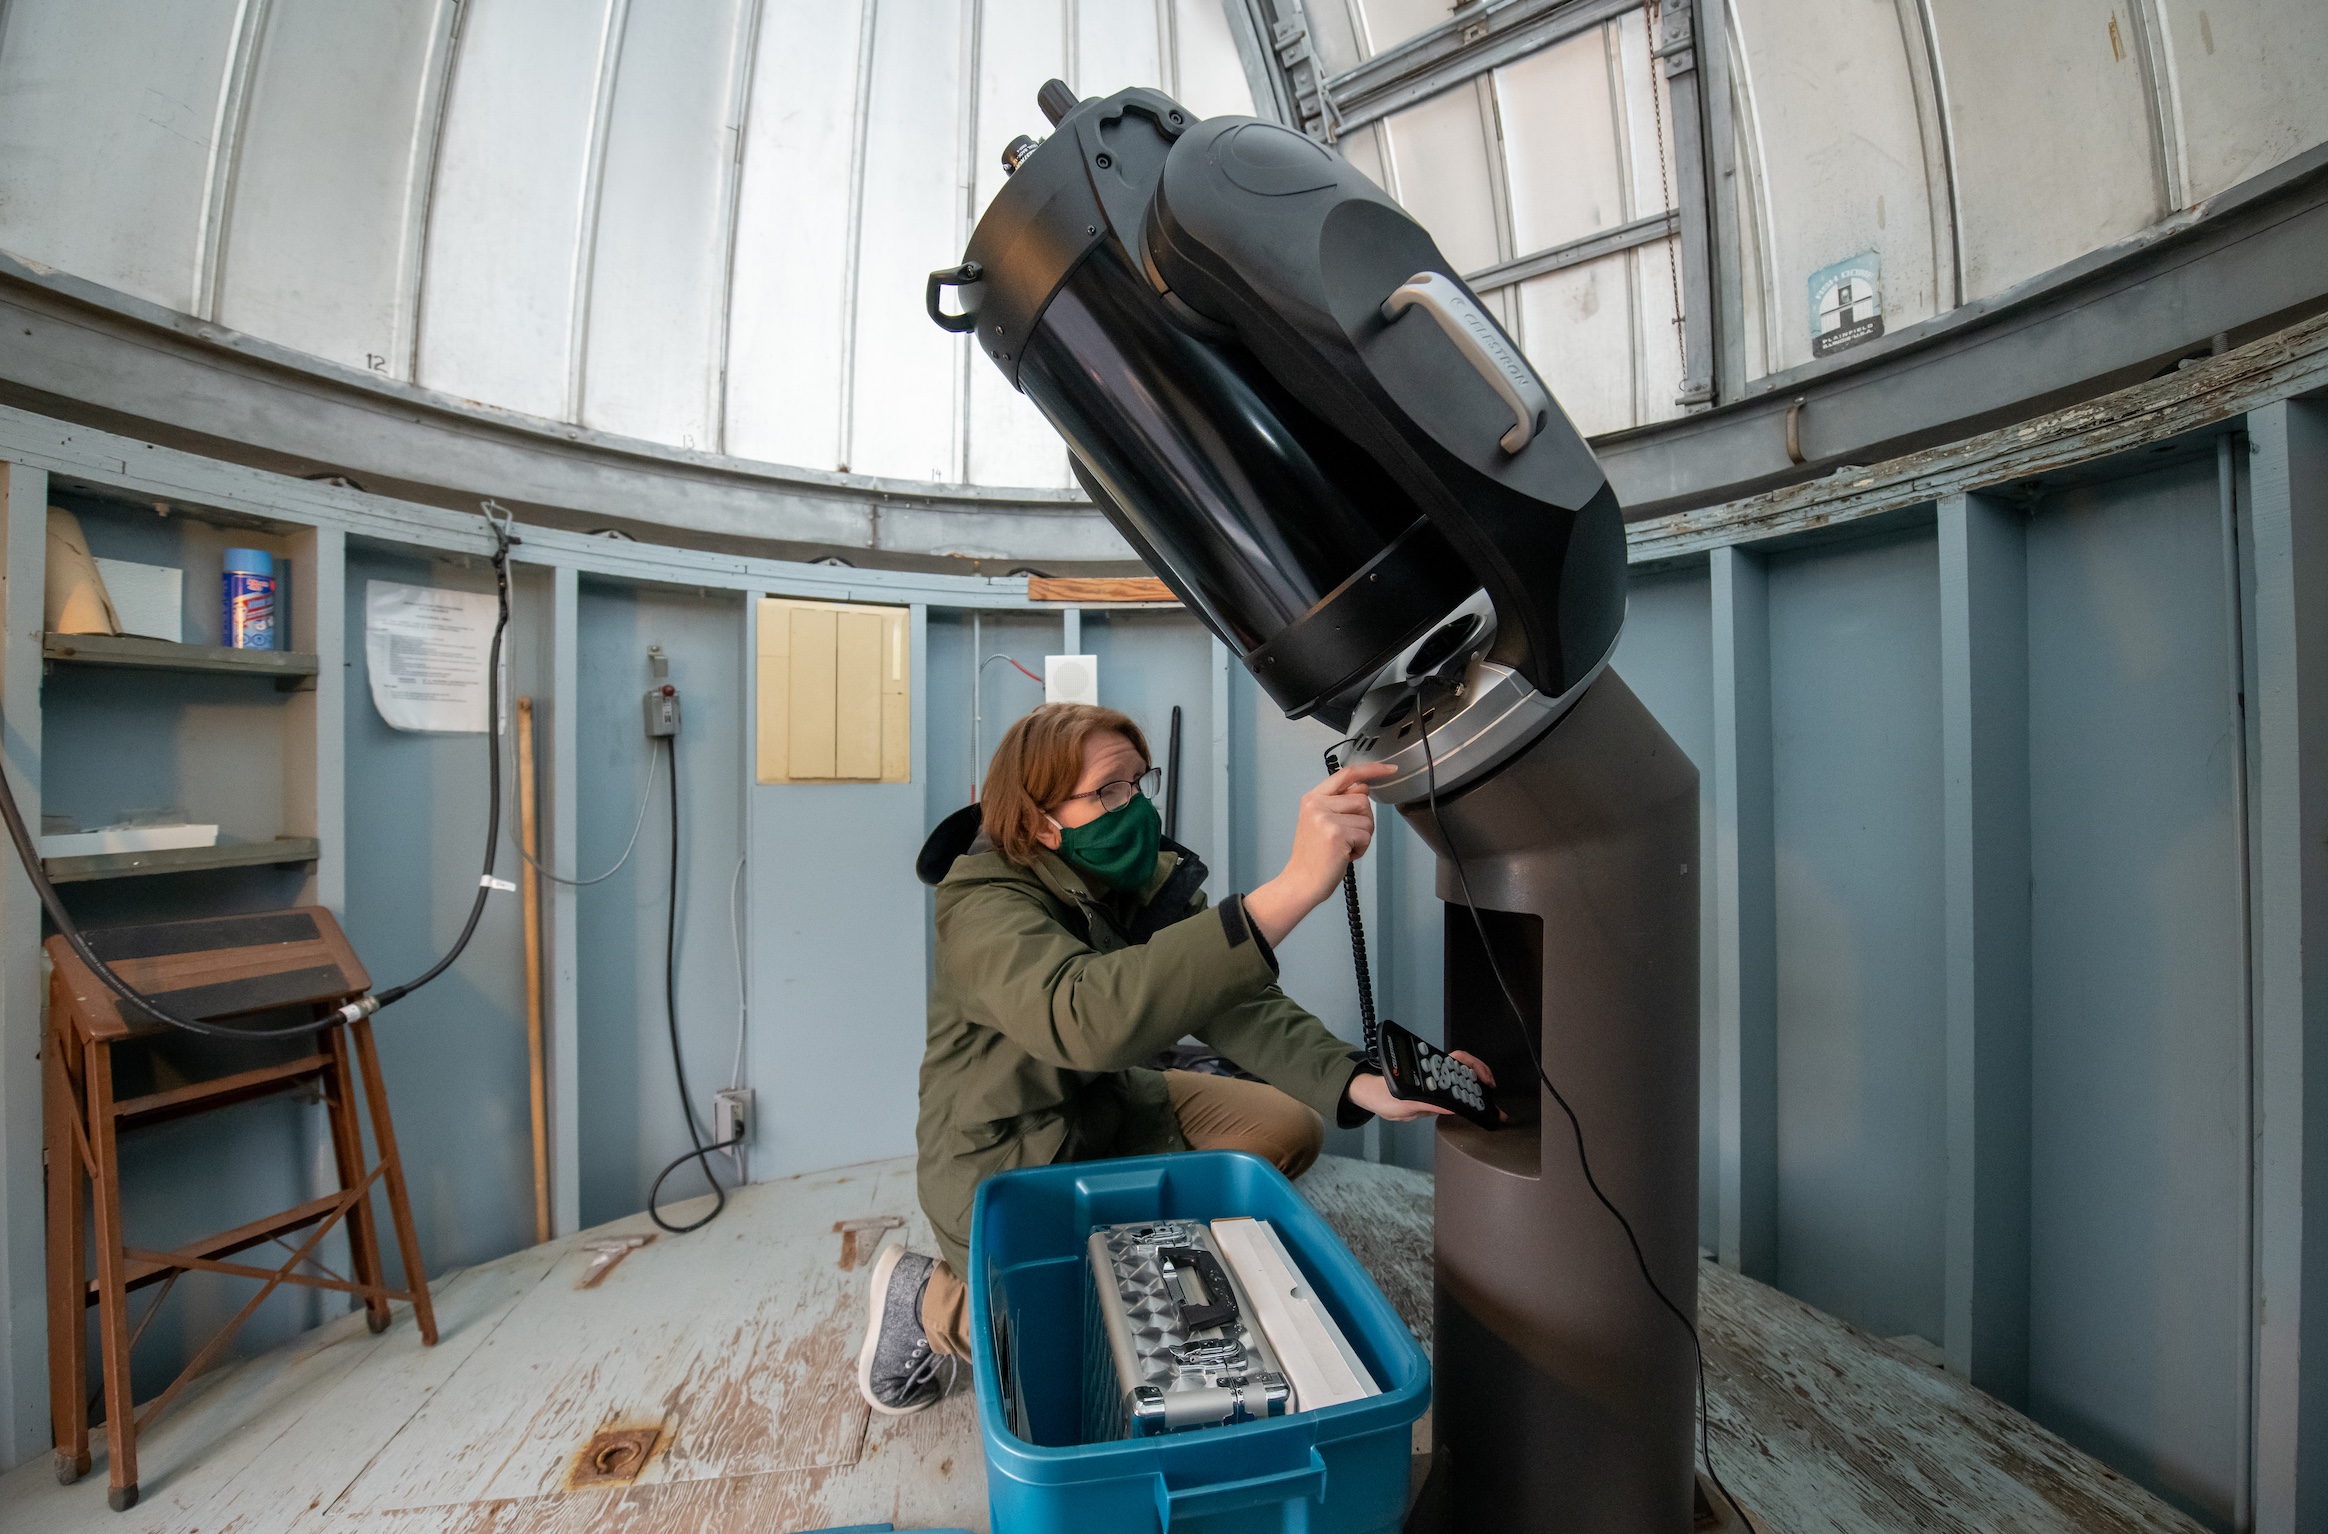 A woman manipulates a shiny black telescope inside of a small room with a domed roof